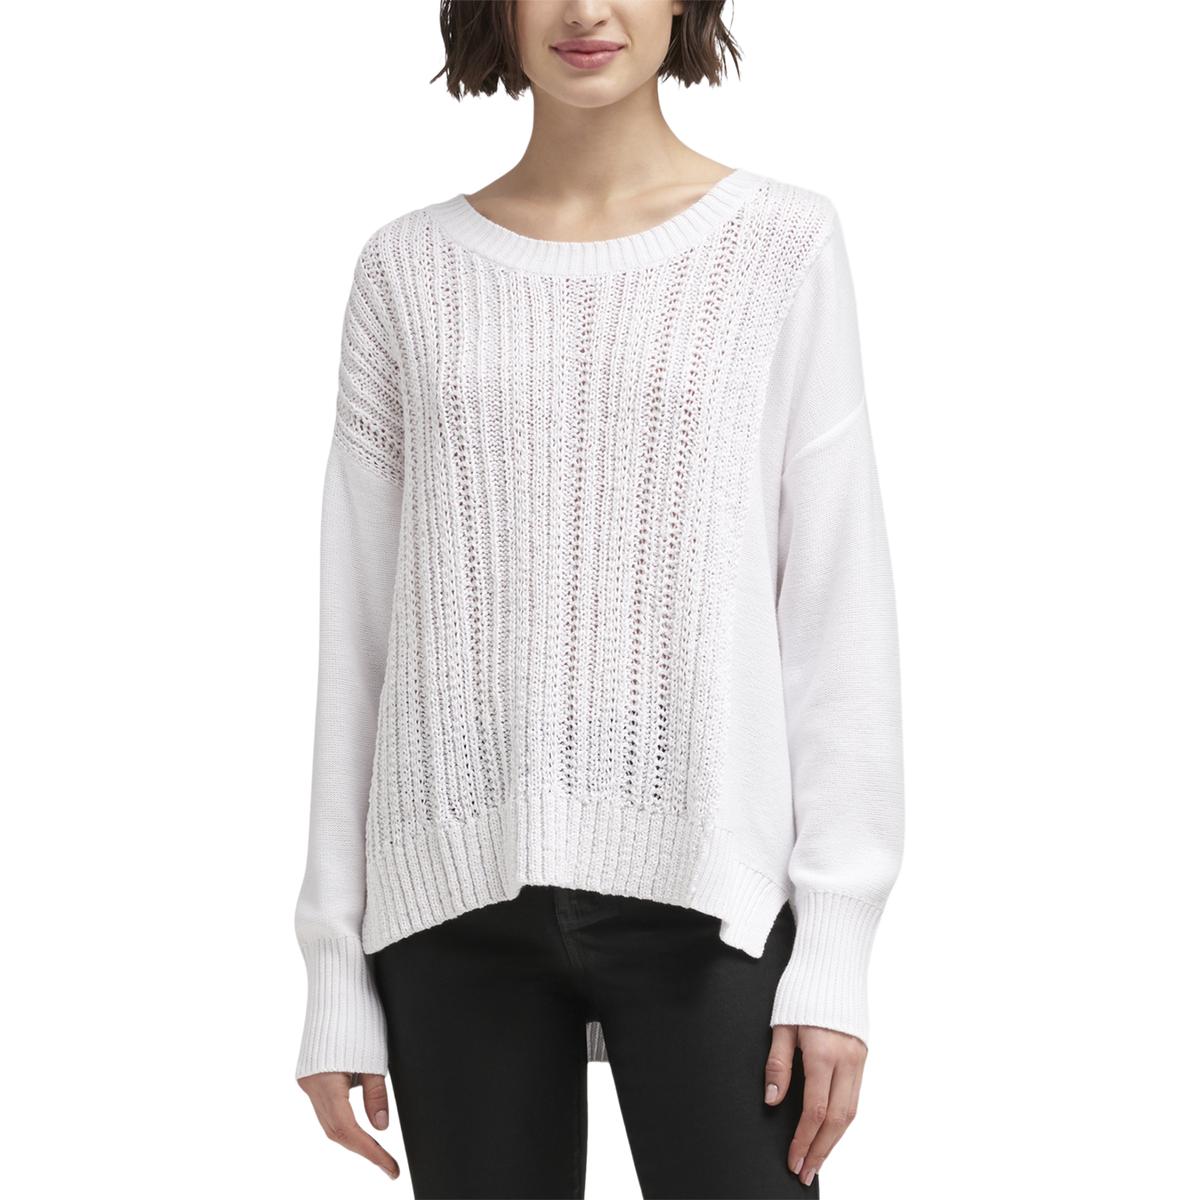 DKNY Womens White Knit Ribbed Trim Mixed Media Pullover Sweater Top XS ...